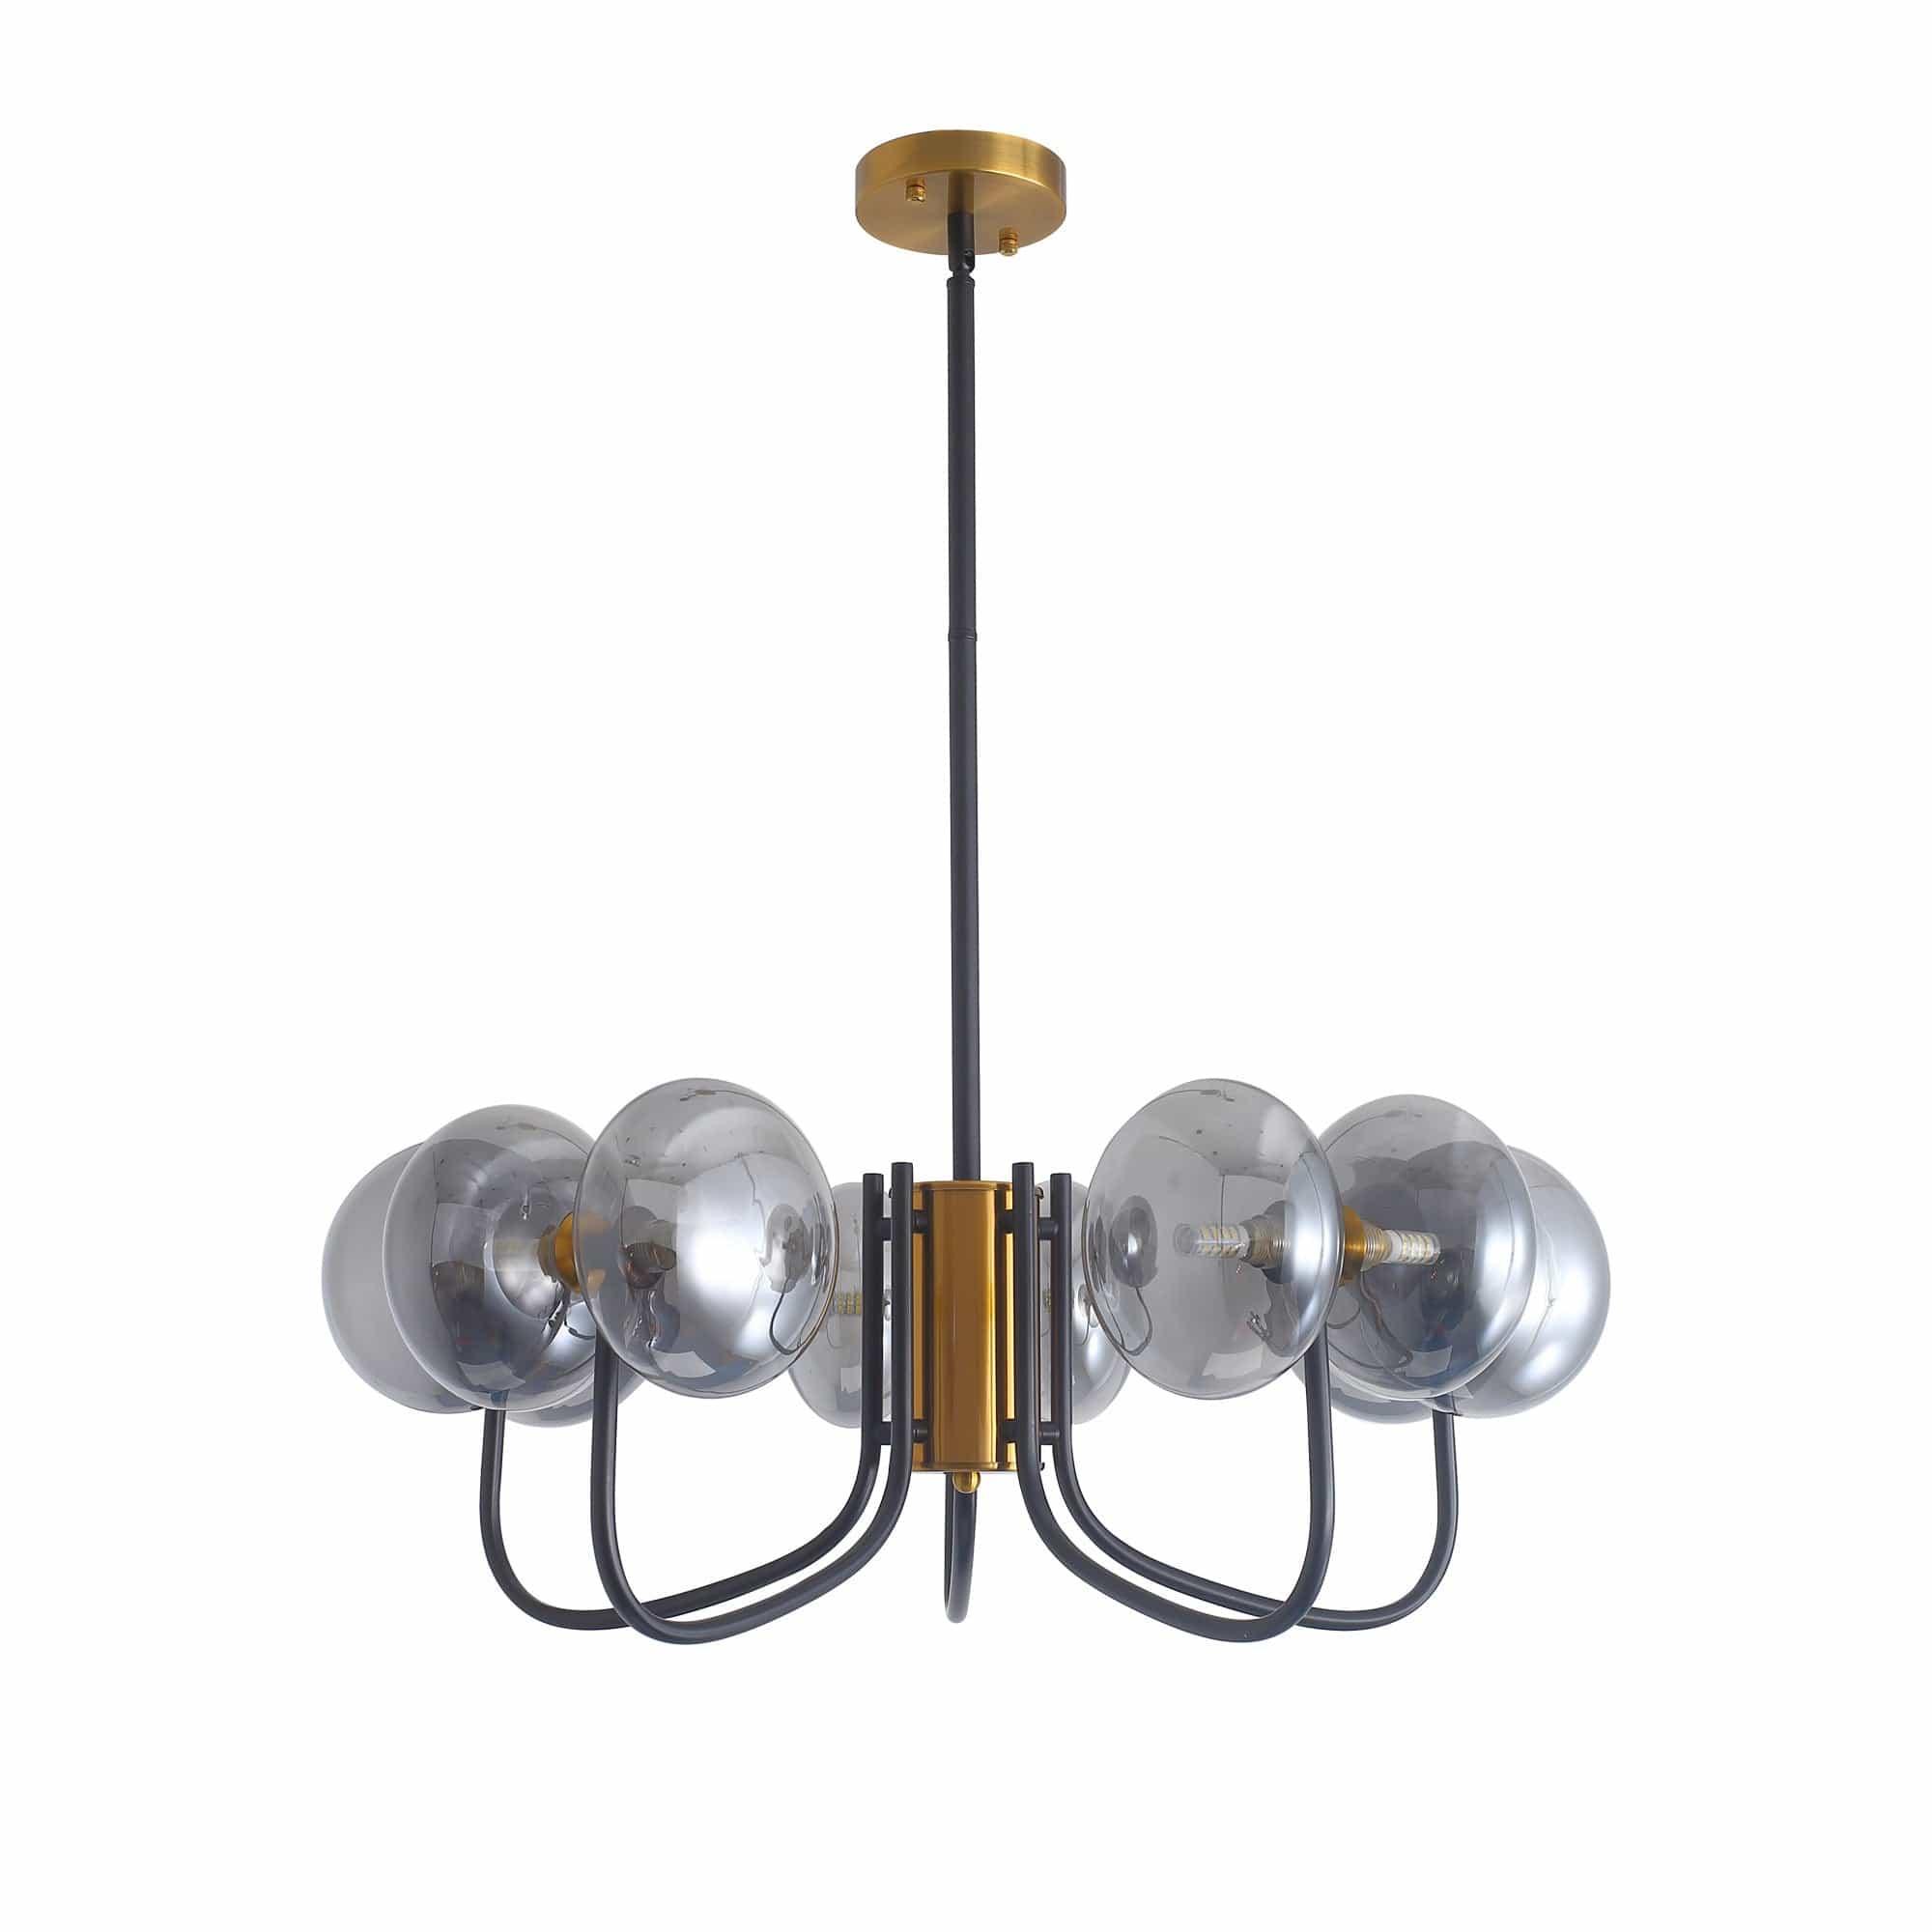 Shop Diocletian Lighting Mademoiselle Home Decor